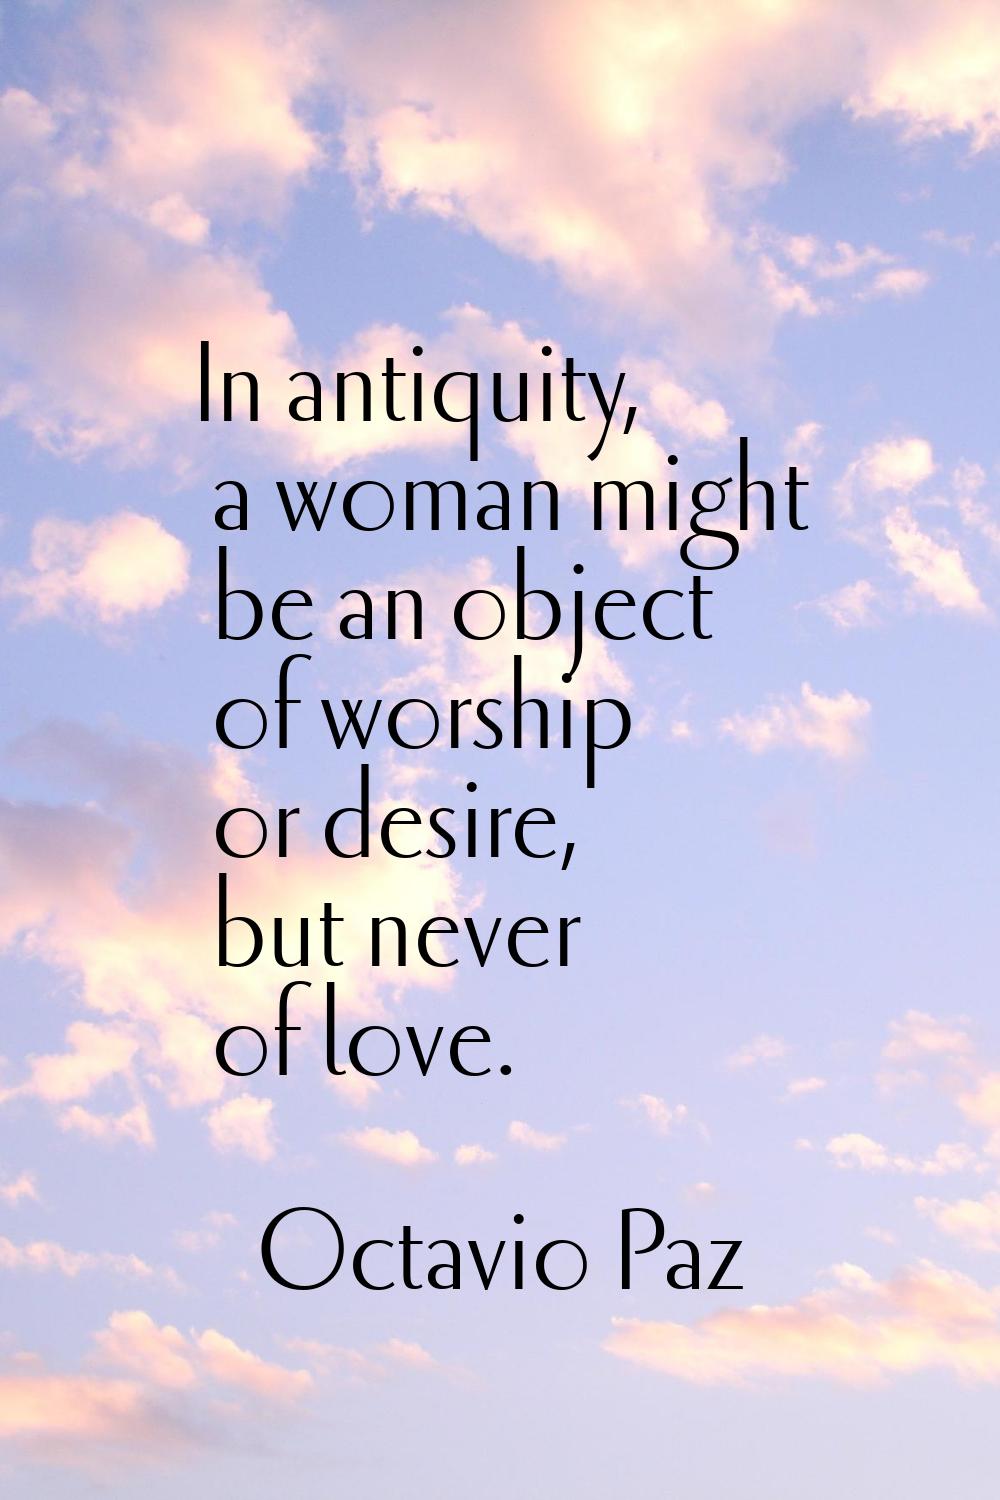 In antiquity, a woman might be an object of worship or desire, but never of love.